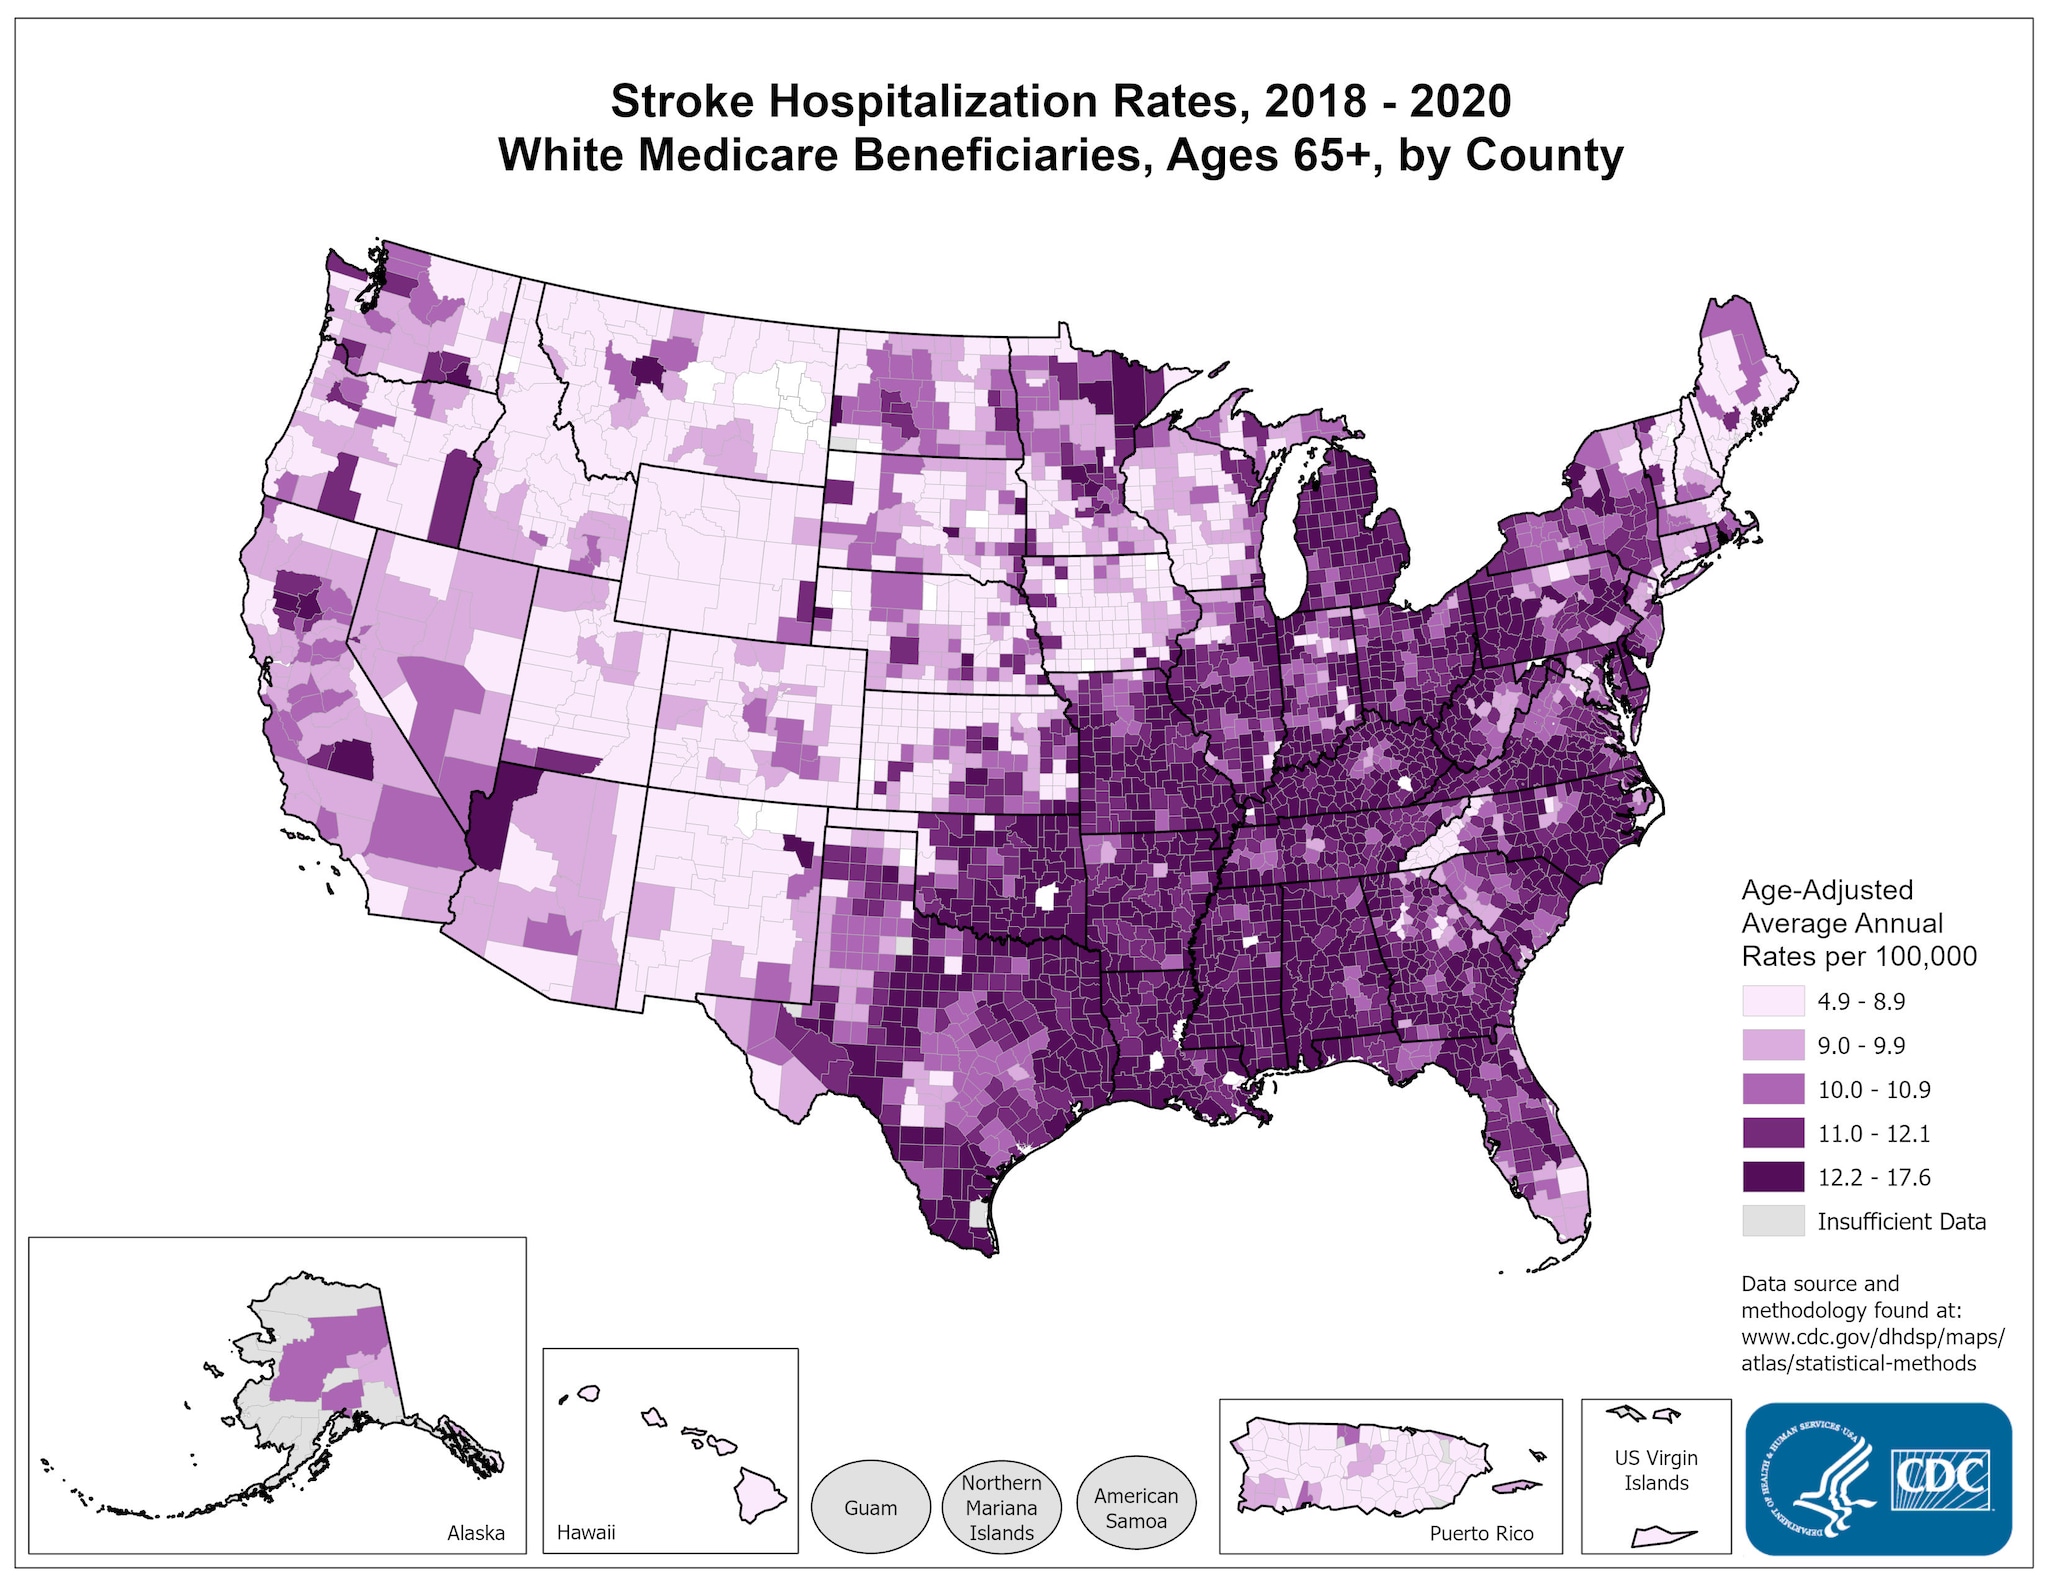 Stroke Hospitalization Rates for 2015 through 2017 for Whites Aged 65 Years and Older by County. The map shows that concentrations of counties with the highest stroke hospitalization rates - meaning the top quintile - are located primarily in the Southeast, with heavy concentrations of high-rate counties in Alabama, Mississippi, Arkansas, Texas, Oklahoma, West Virginia, Michigan, North Carolina, Kentucky, Tennessee and Louisiana. Pockets of high-rate counties also are found in South Carolina, Florida, Illinois, Indiana, Ohio, Pennsylvania, Delaware, Missouri, and Georgia.